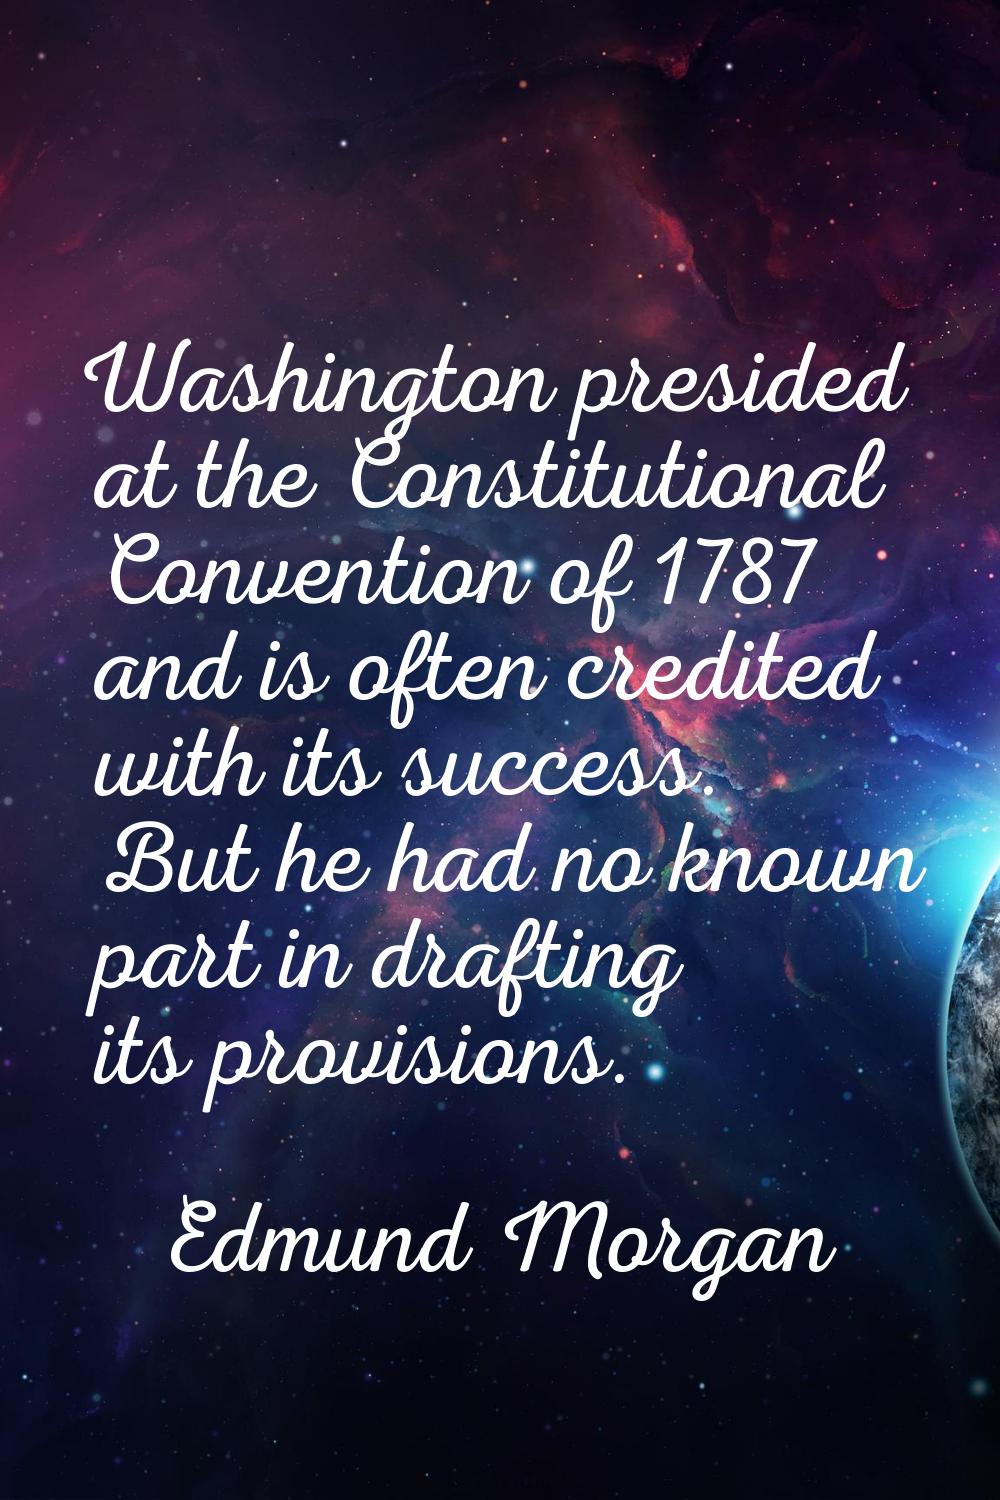 Washington presided at the Constitutional Convention of 1787 and is often credited with its success